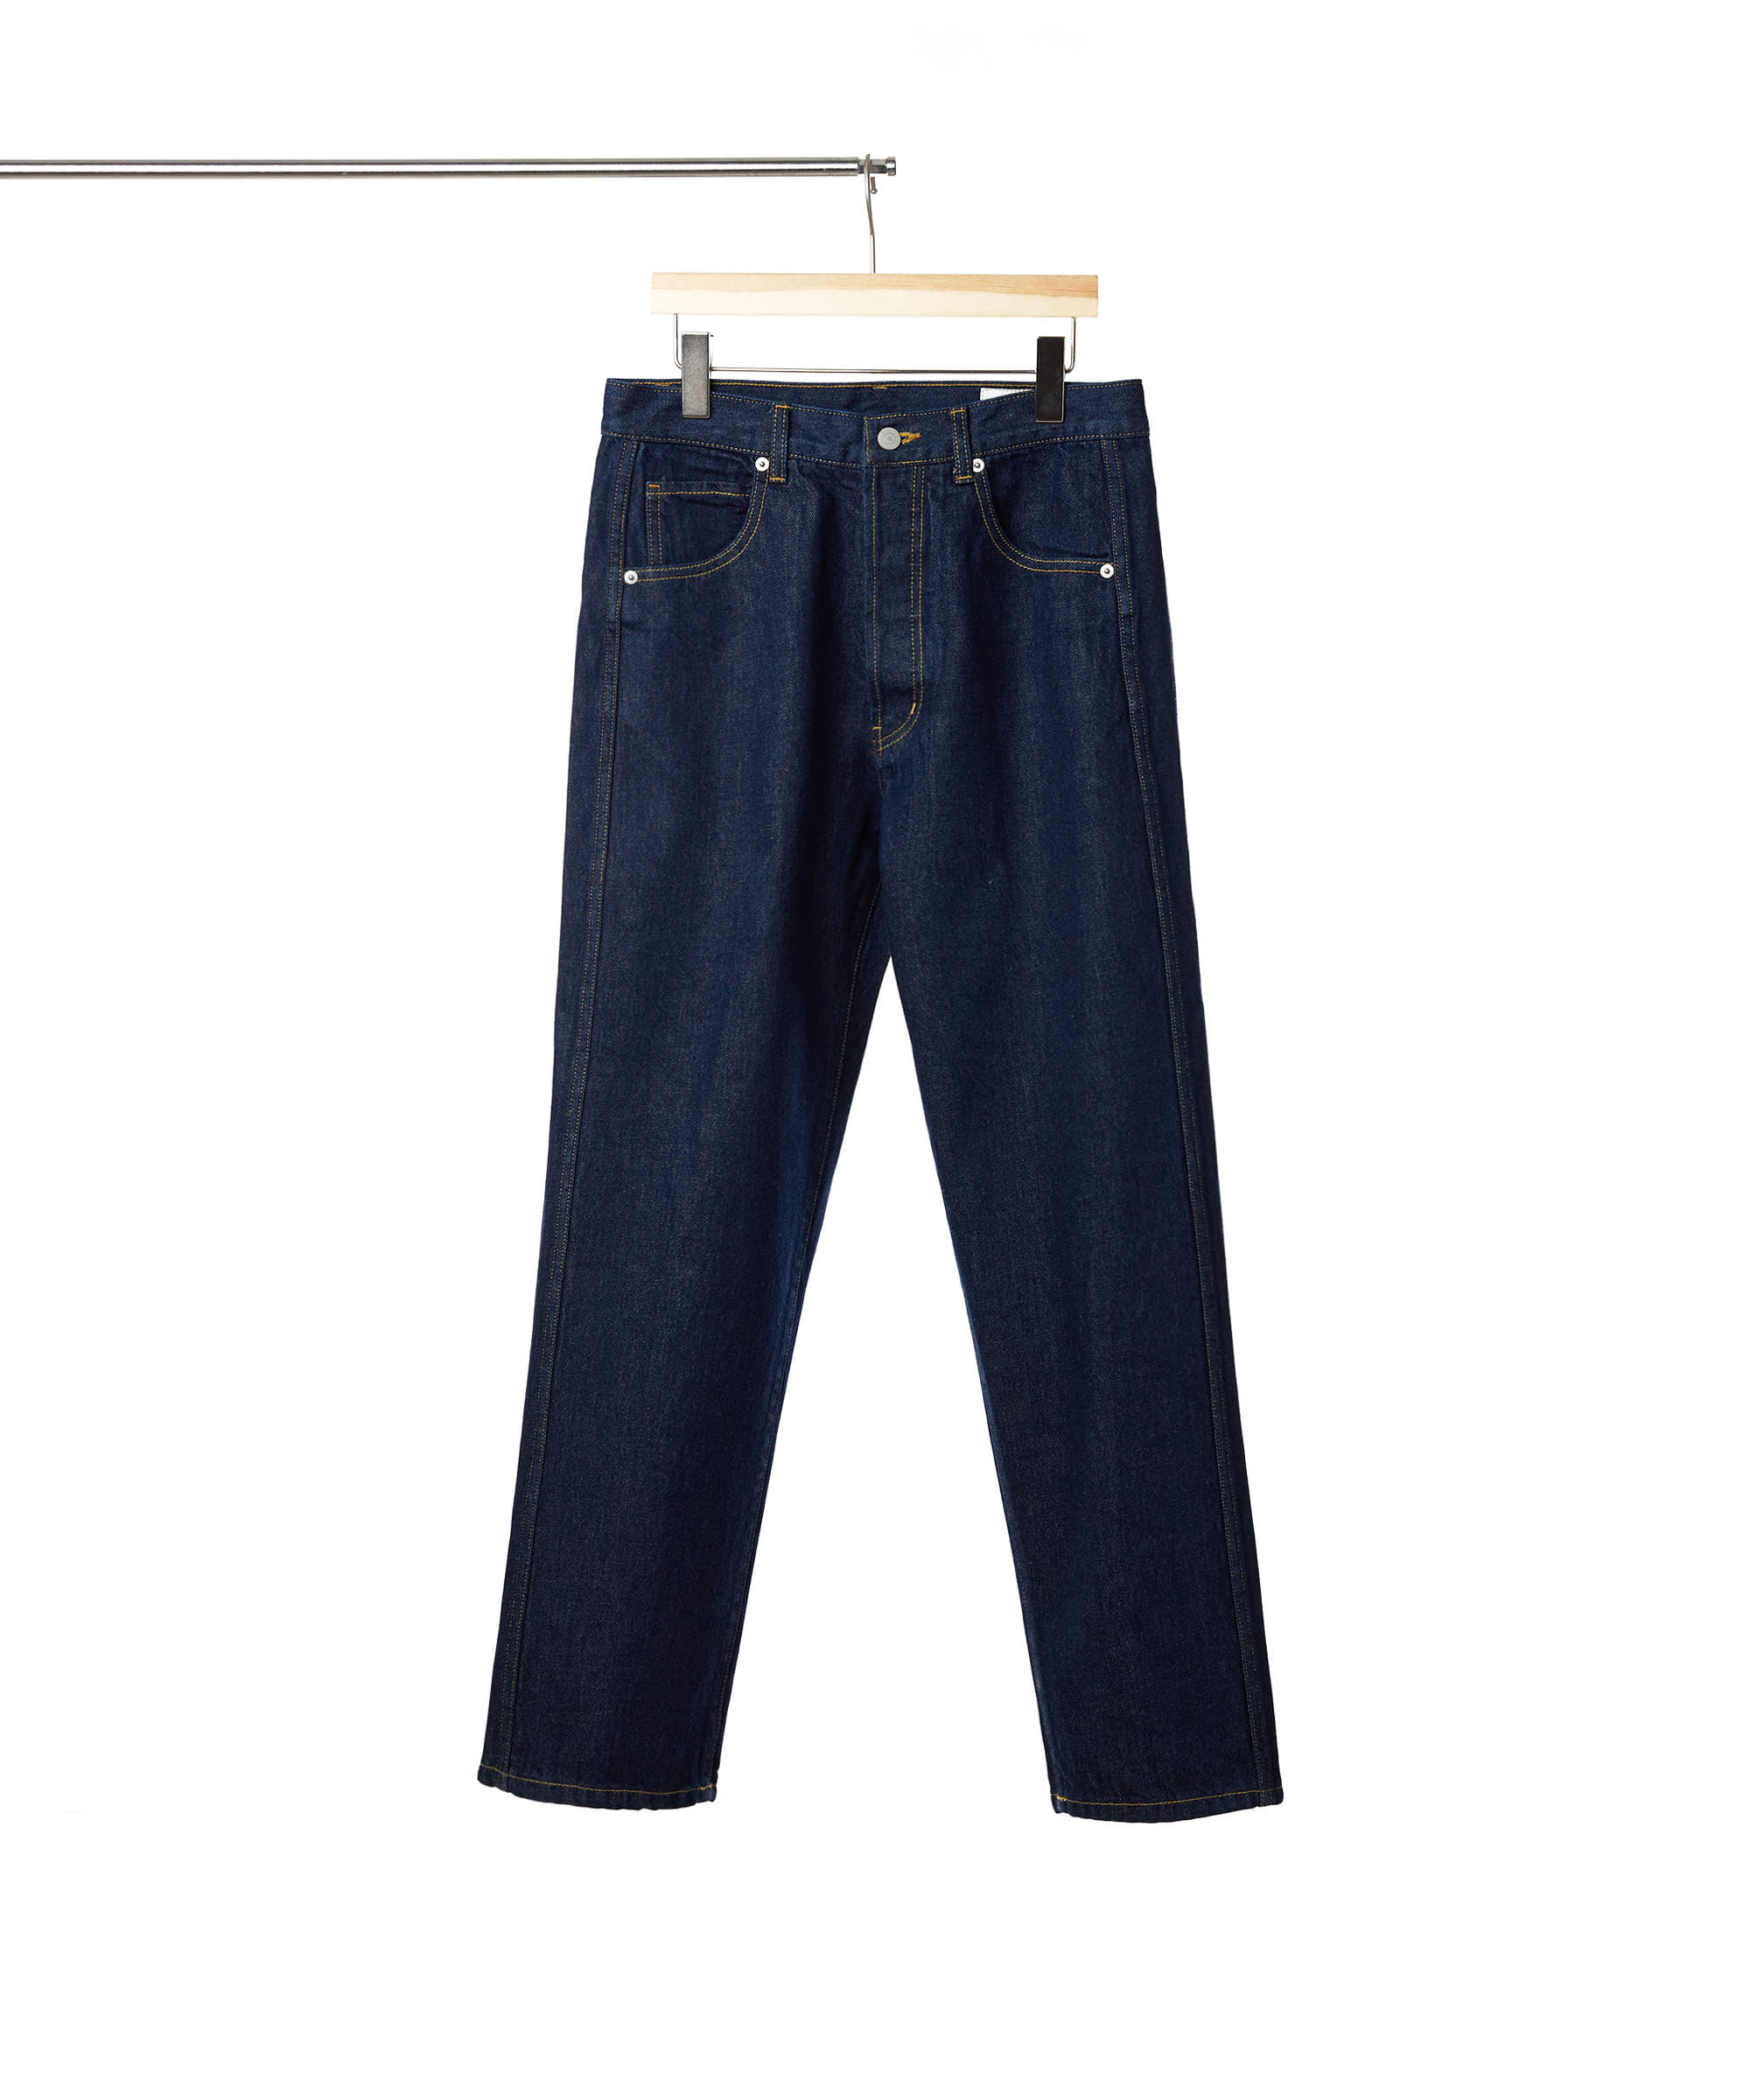 NORMAL WASHED FLAWLESS DENIM PANTS 02-2